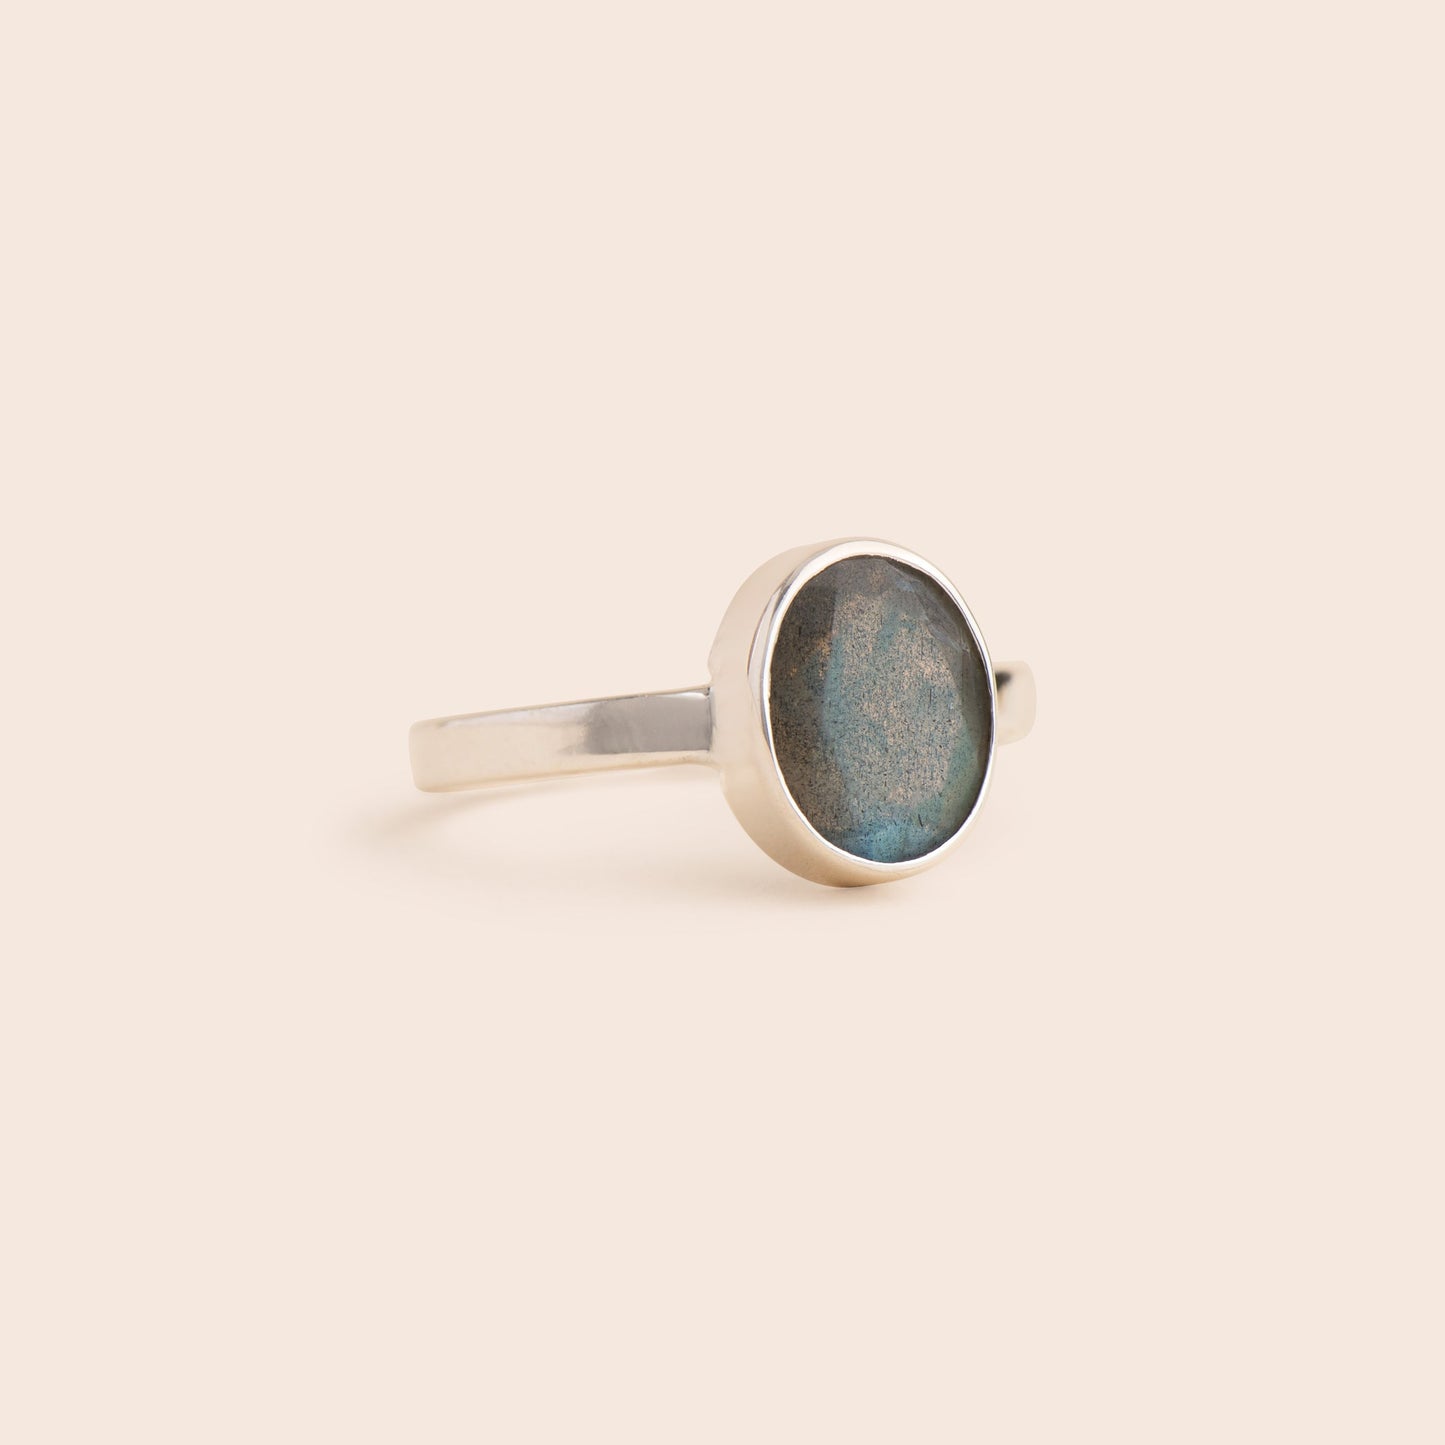 Load image into Gallery viewer, Labradorite Large Oval Sterling Silver Ring - Gemlet
